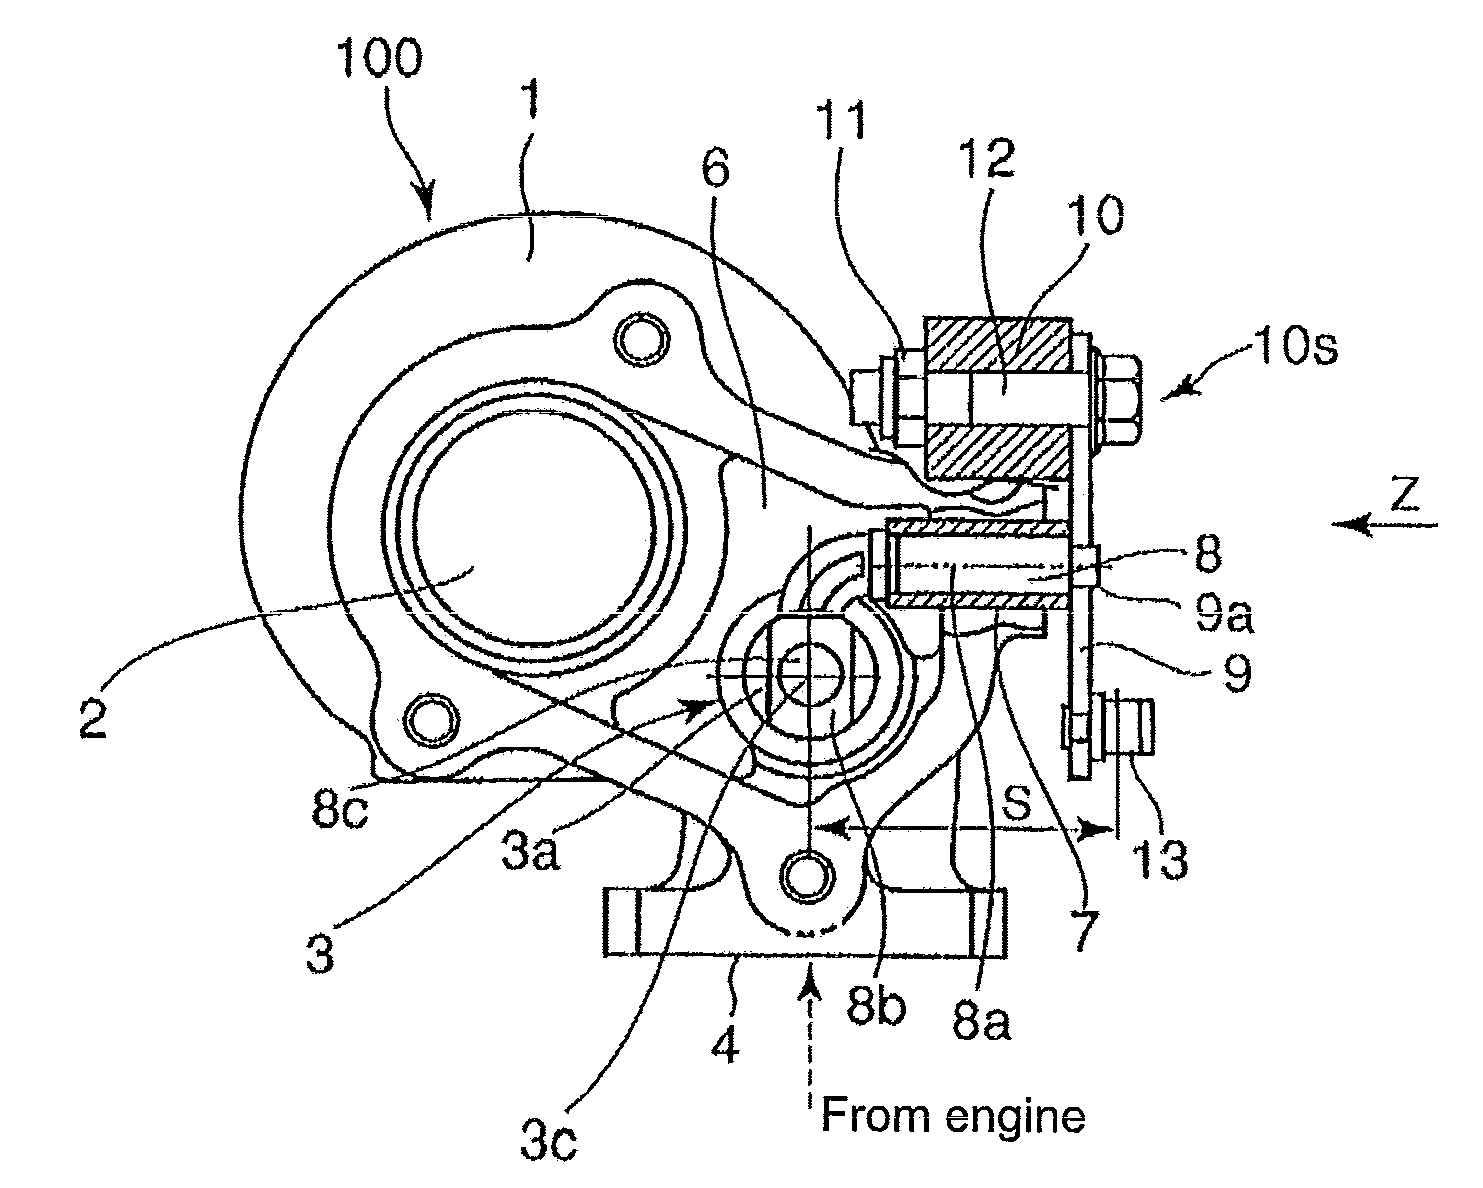 Exhaust turbine equipped with exhaust control valve